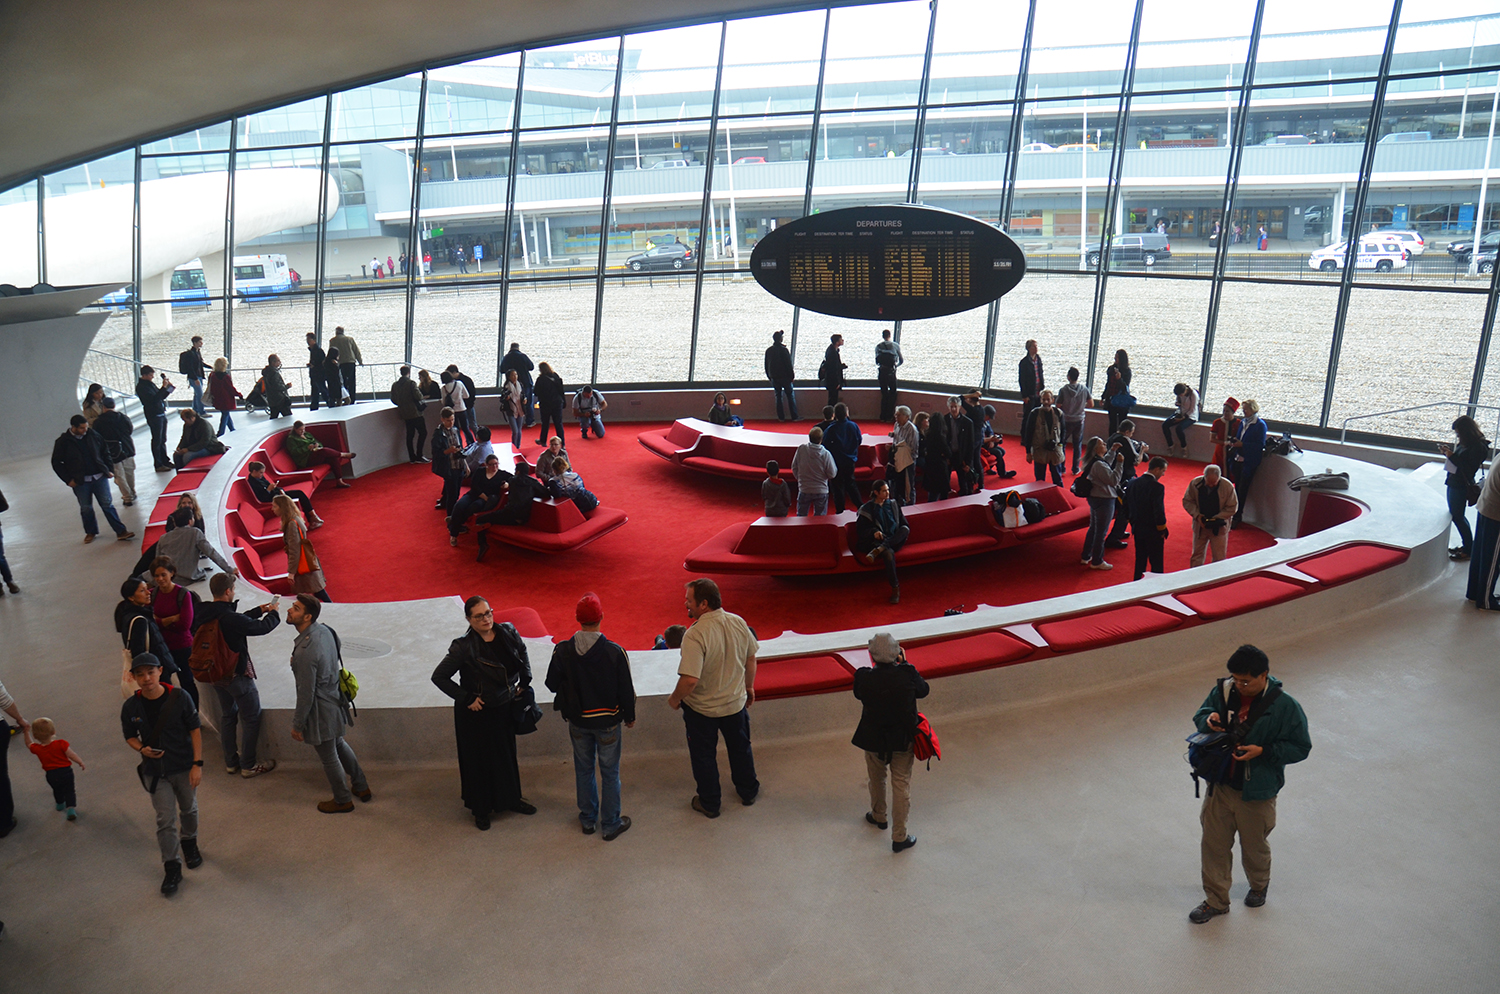 Visitors inside the TWA Flight Center during Open House New York Weekend in October 2014. Photograph by Evan Bindelglass.